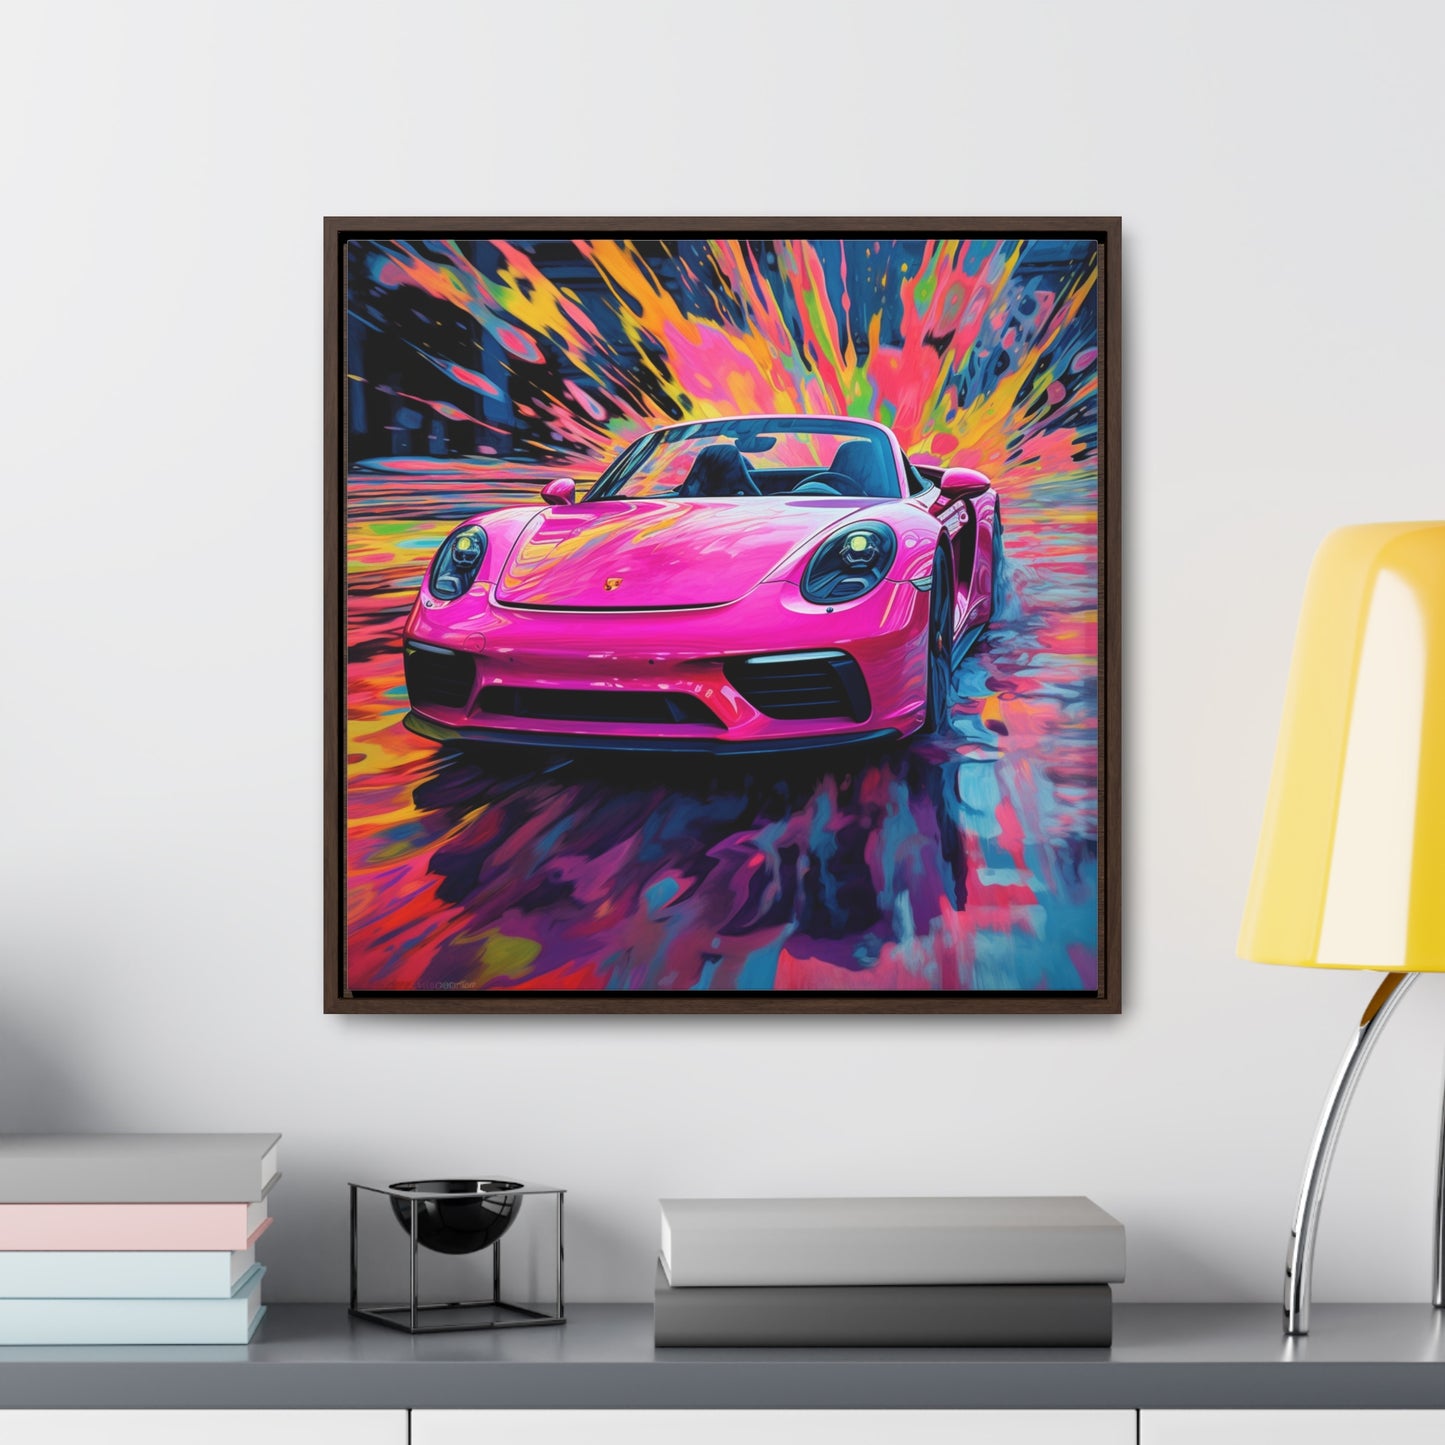 Gallery Canvas Wraps, Square Frame Pink Porsche water fusion 2